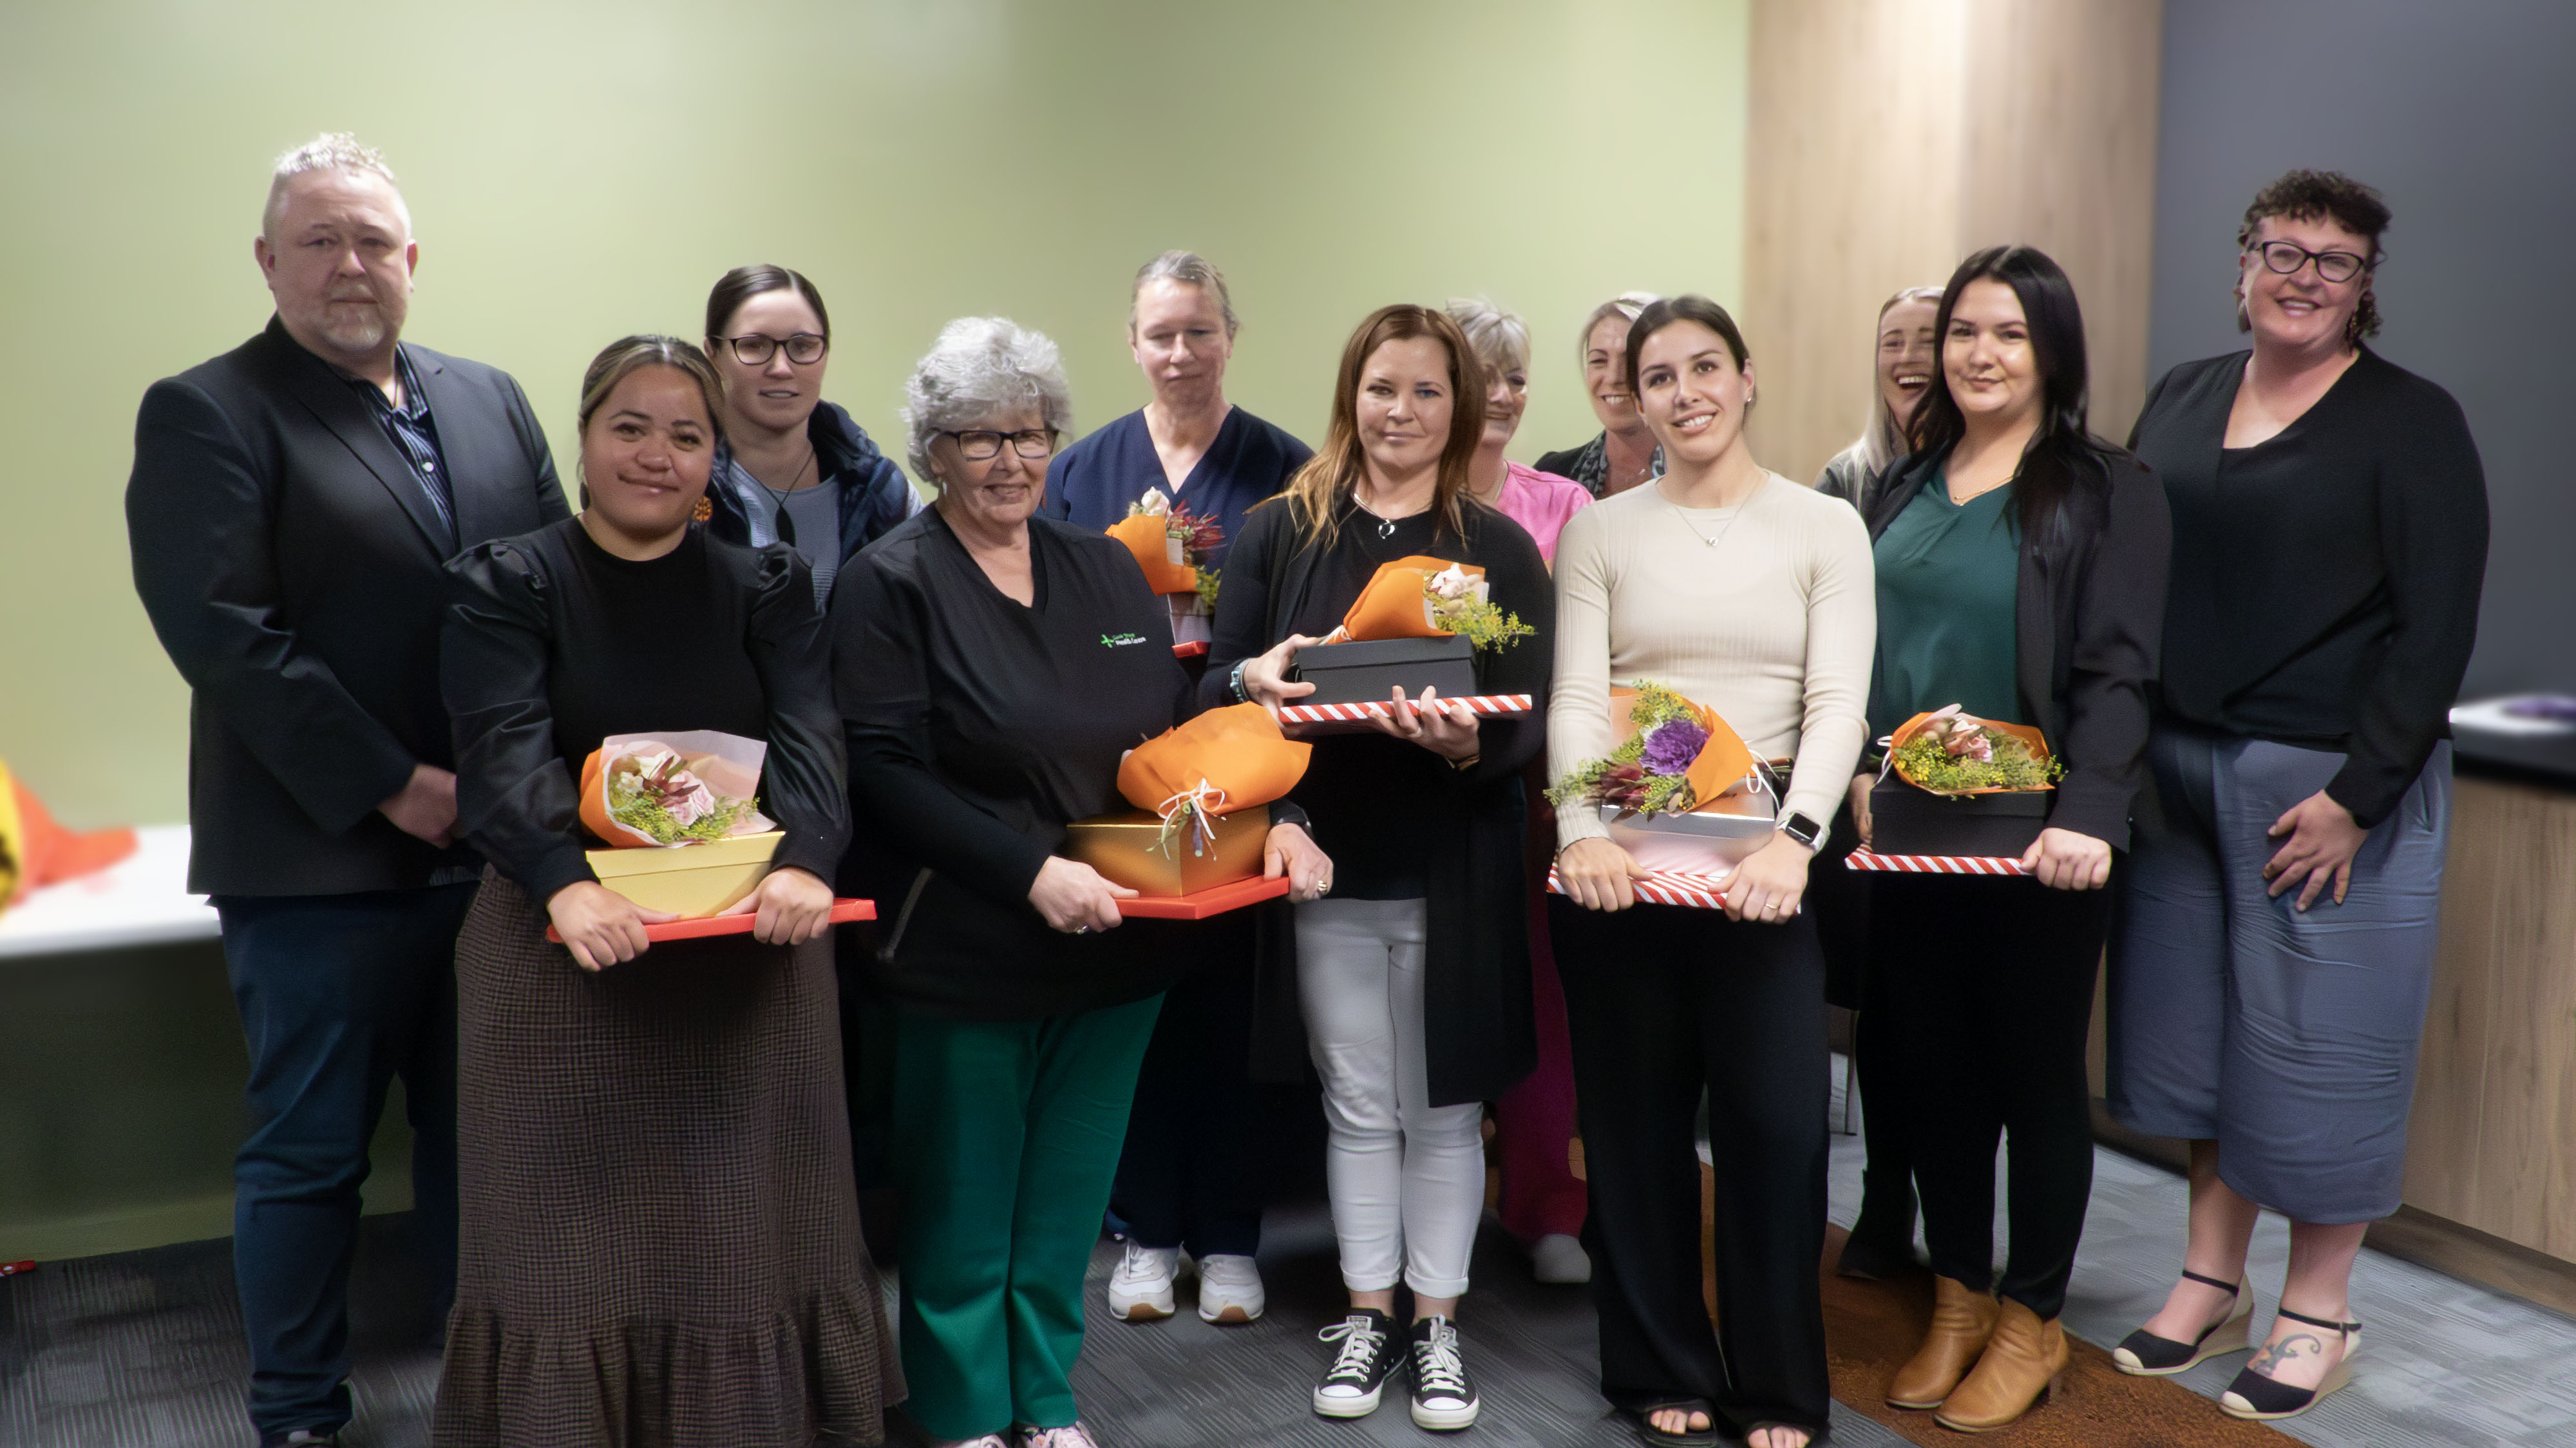 Graduates of the New Zealand Certificate in Health & Wellbeing (Primary Care Practice Assistance)